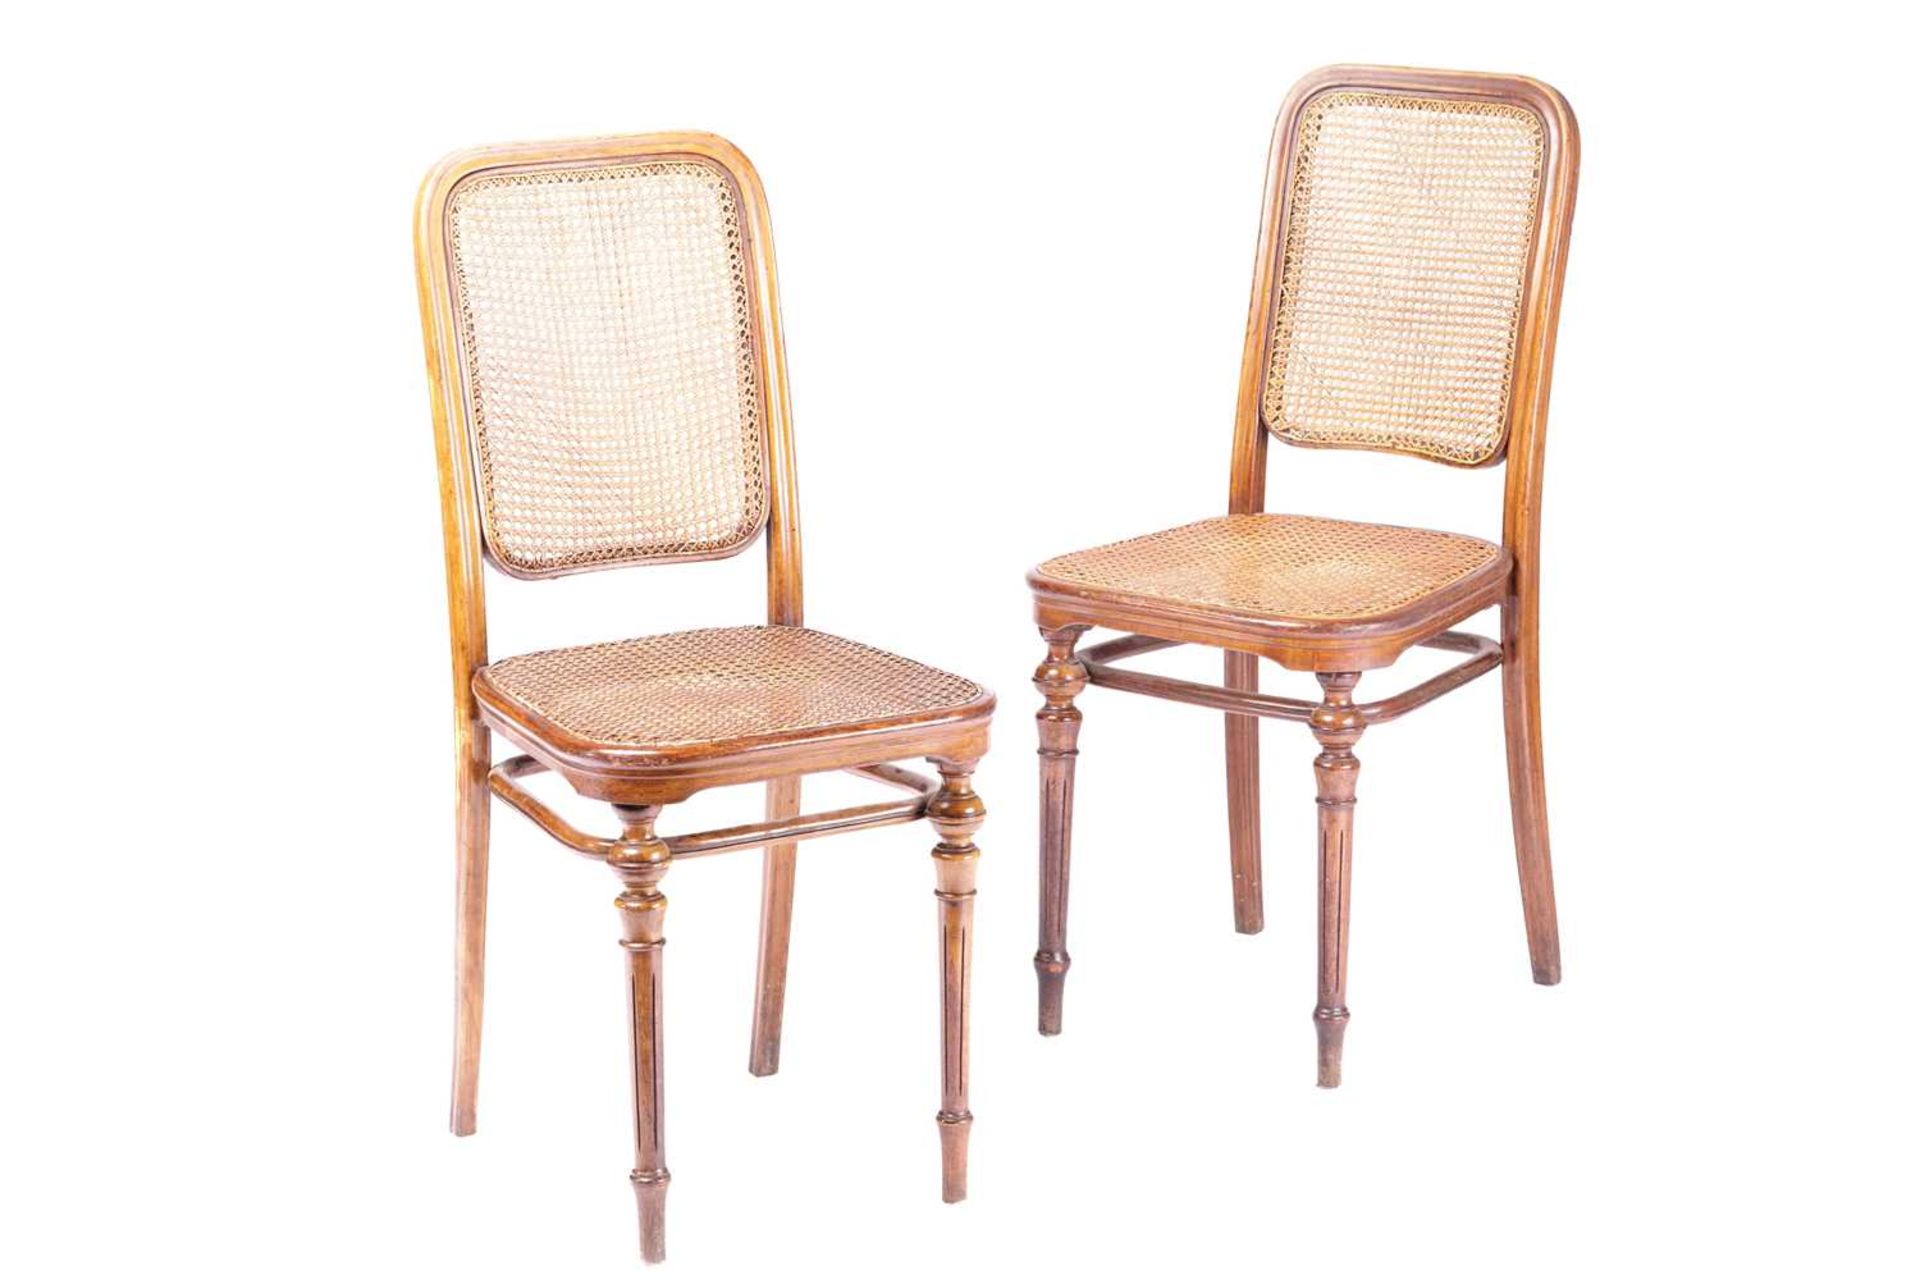 Gerbruder Thonet; Chair 436(variant) a set of six beechwood chairs, based on the chair designed in - Image 2 of 5